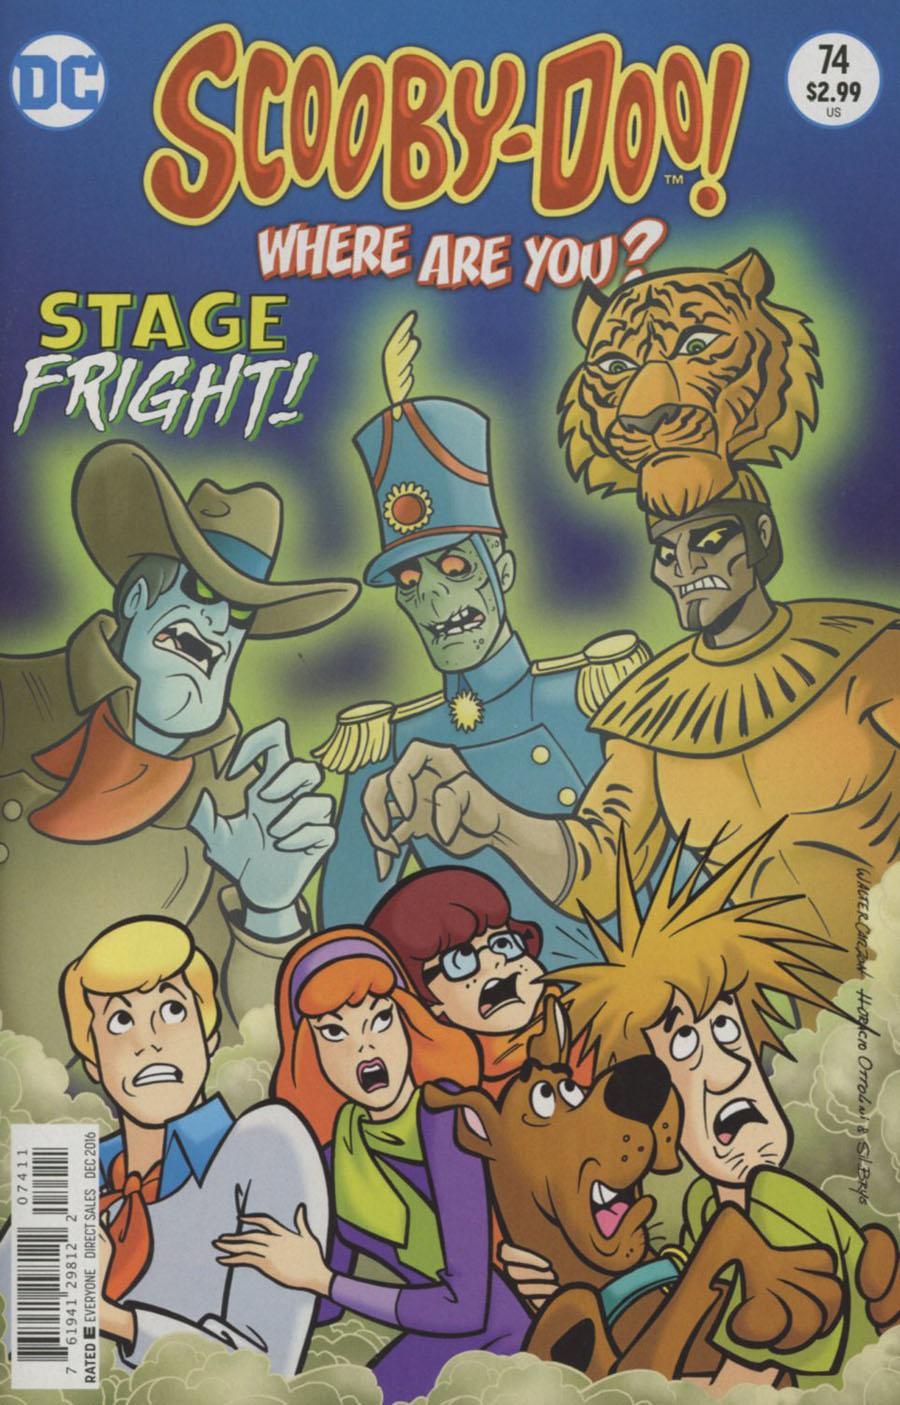 Scooby-Doo Where Are You Vol. 1 #74